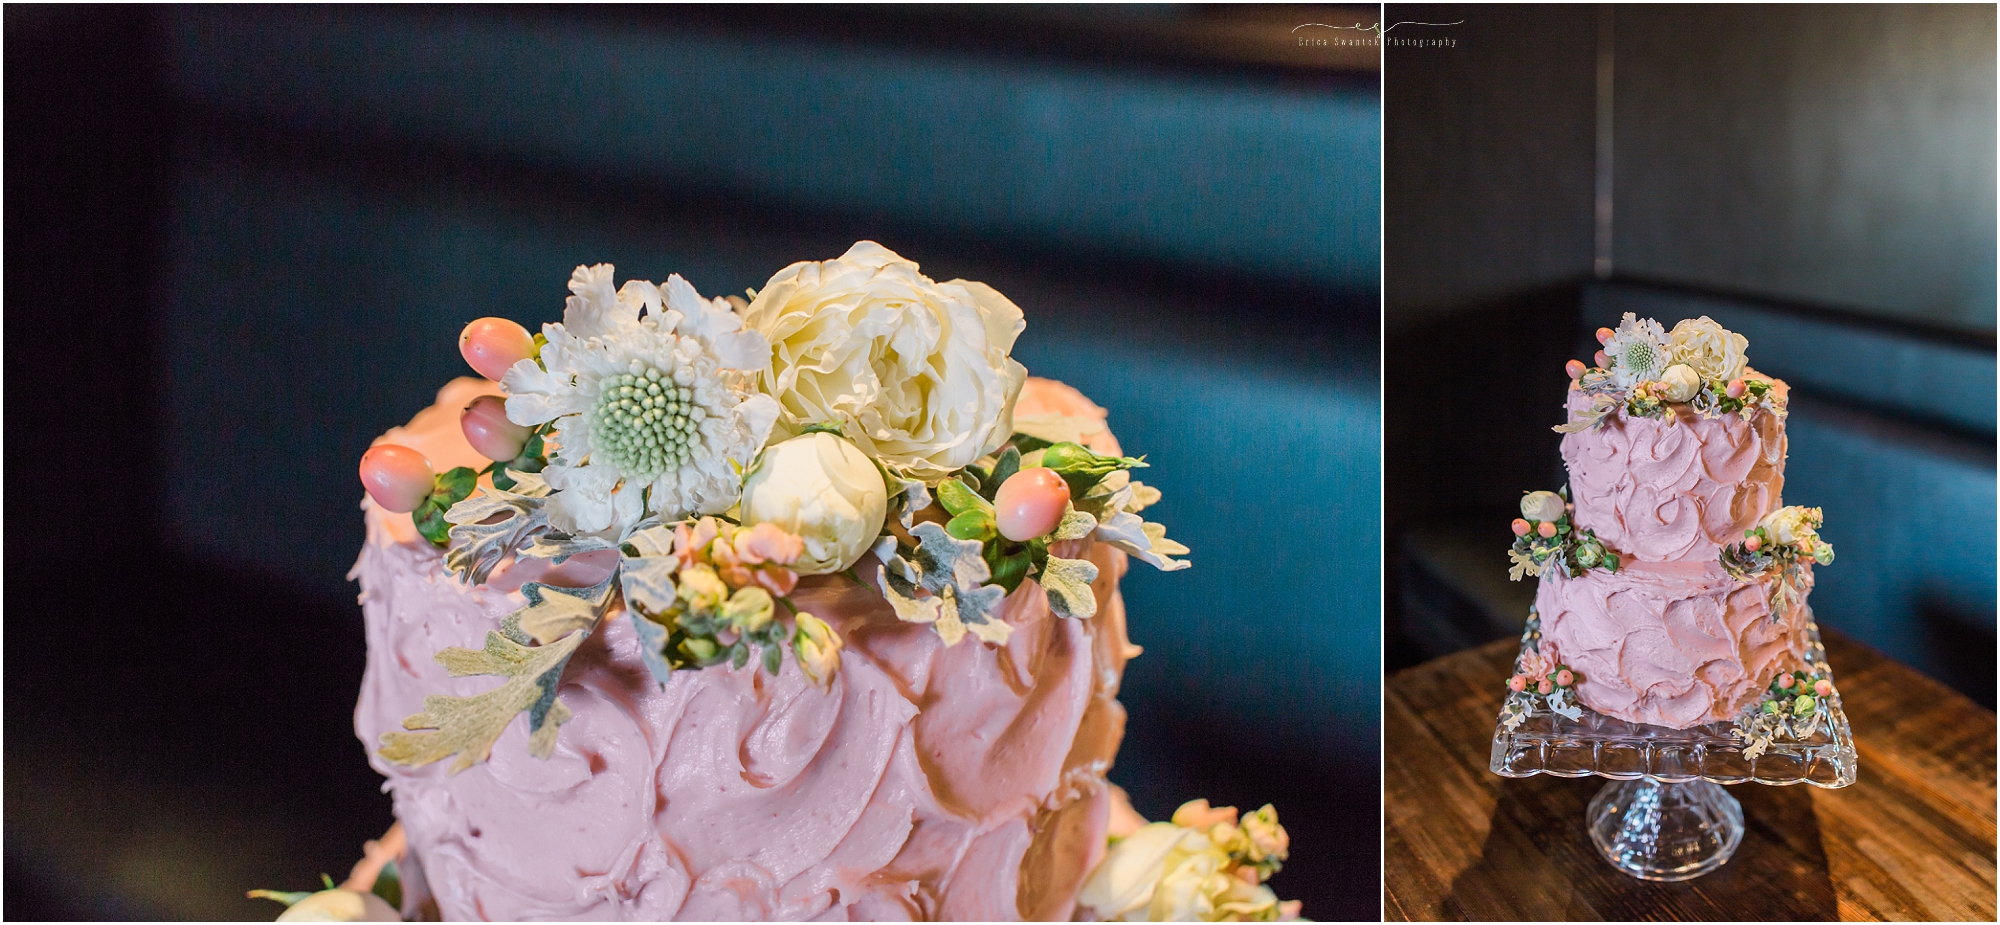 A beautiful cake created by Faith & Flour Baking out of Redmond, OR. 